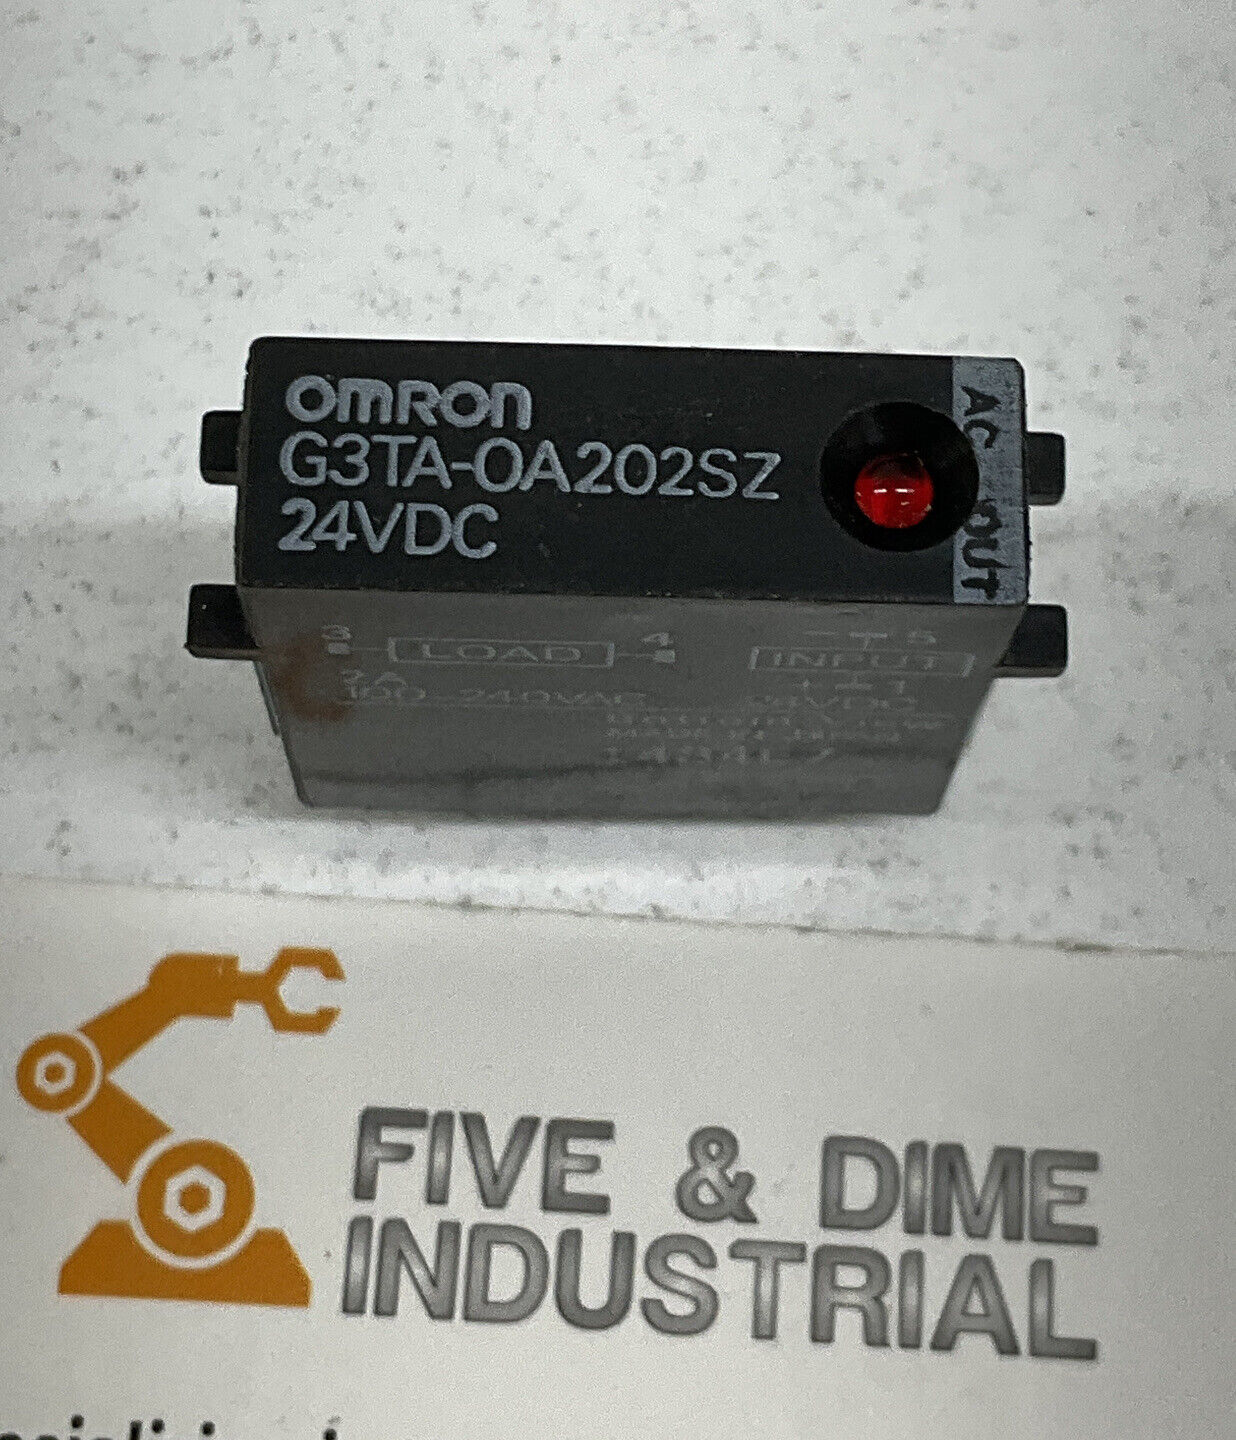 Omron G3TA-0A202SZ New Solid State Relay 24VDC (YE164) - 0